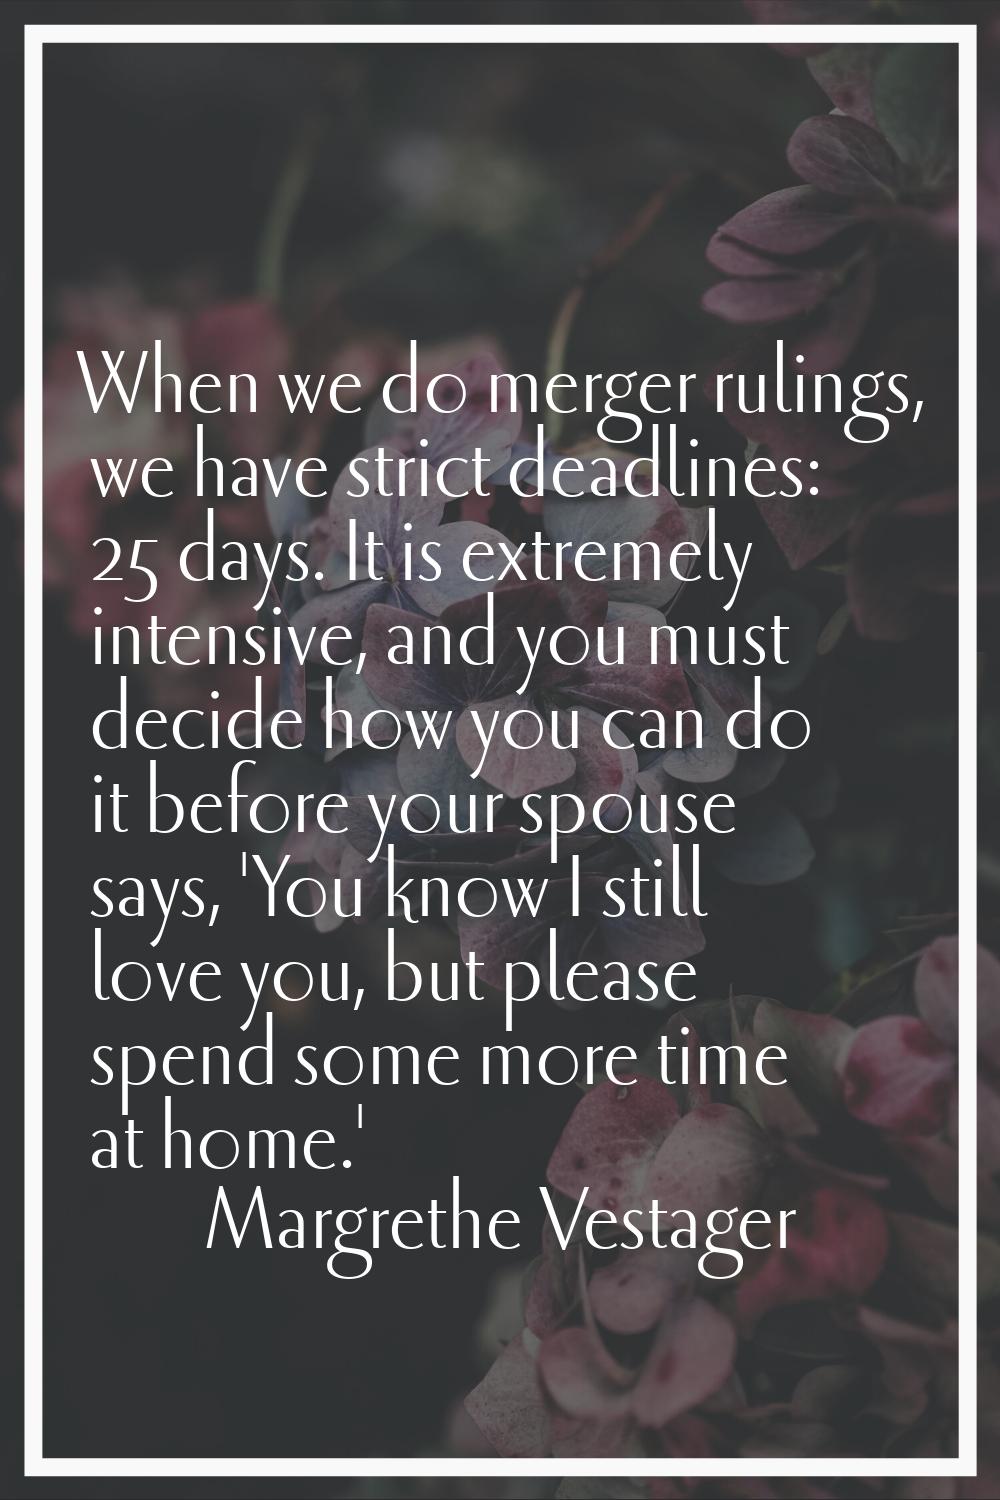 When we do merger rulings, we have strict deadlines: 25 days. It is extremely intensive, and you mu